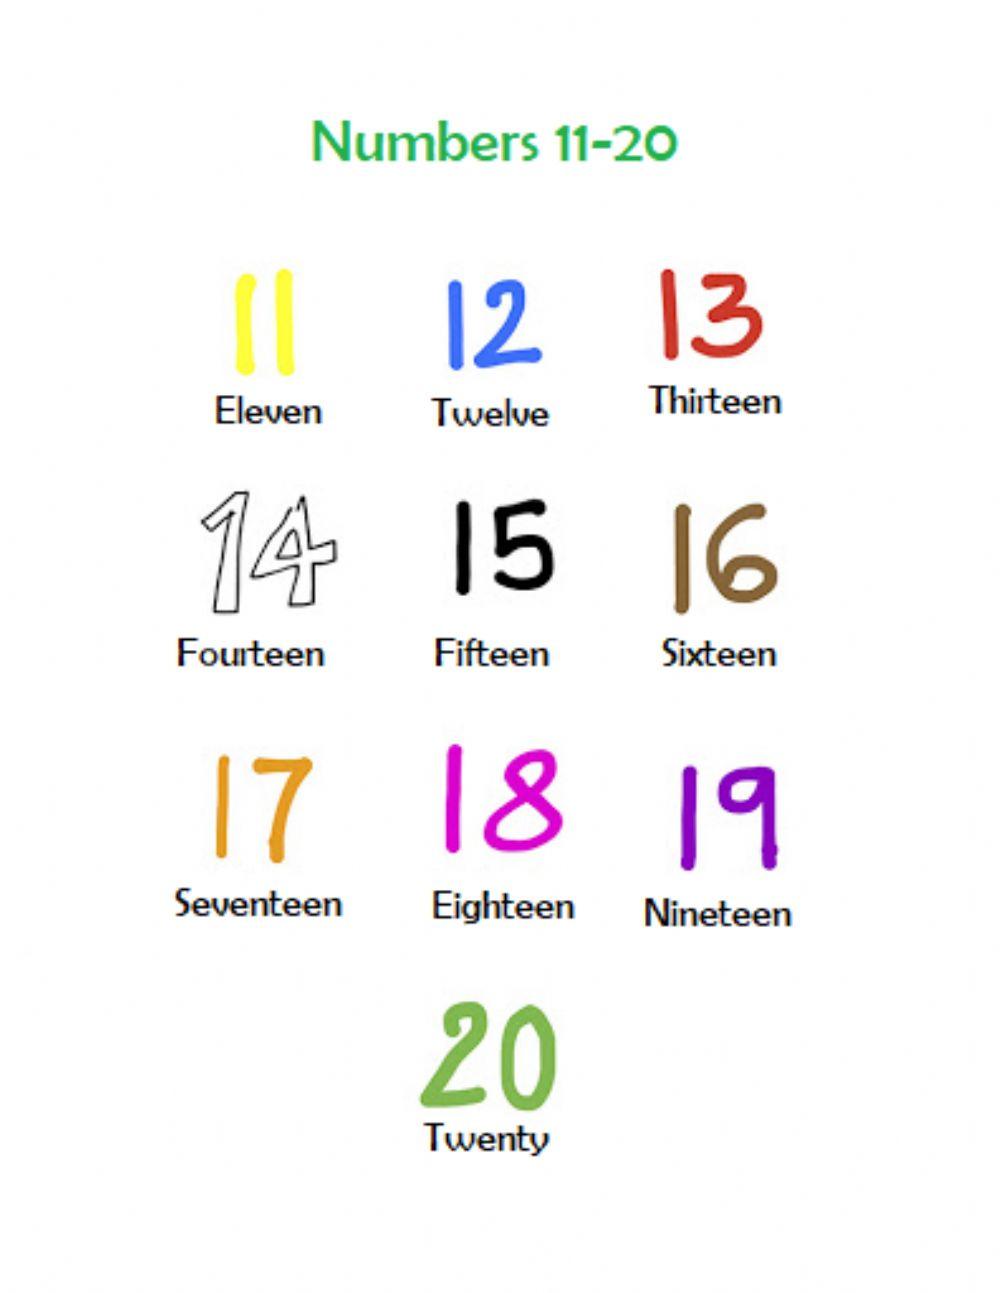 Numbers 10-20 Reading and pronunciation